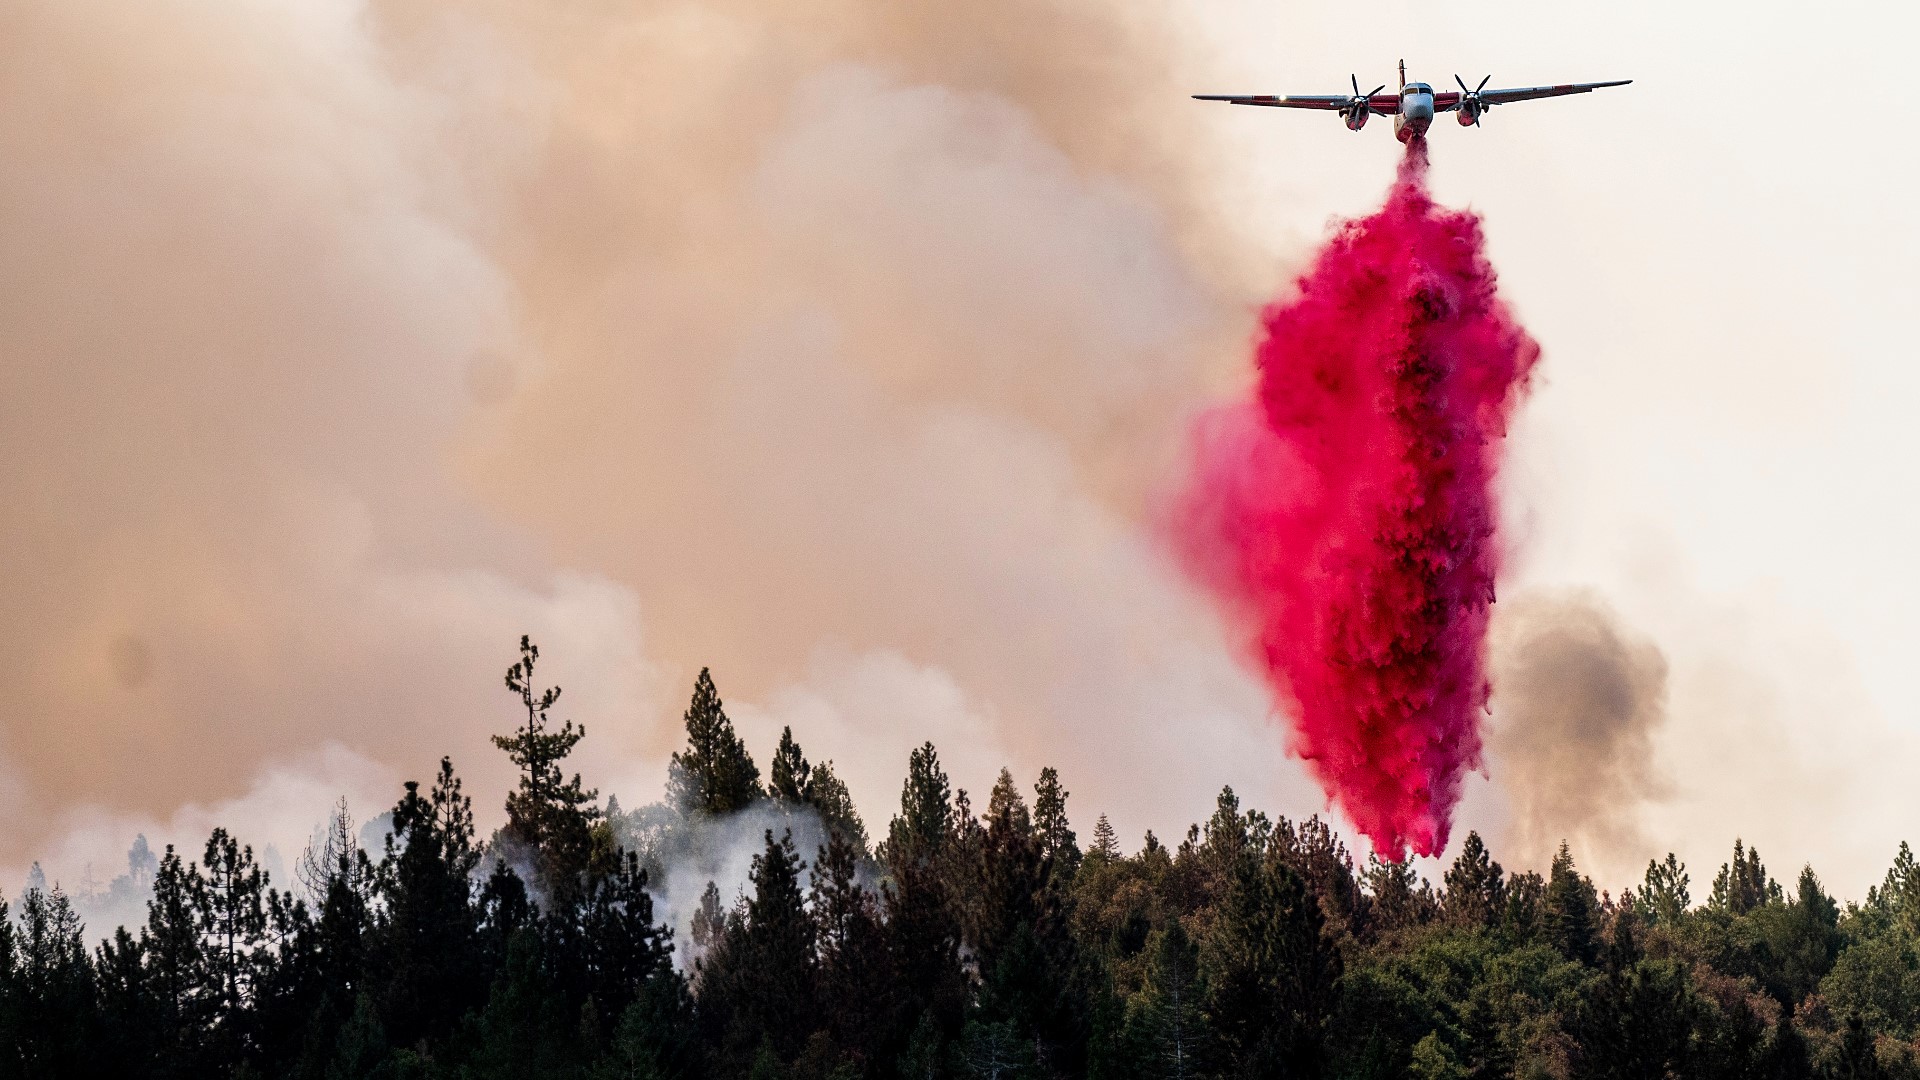 A coalition that includes Paradise, California, said a court ruling that stopped the use of retardant would have put lives, homes and forests at risk.